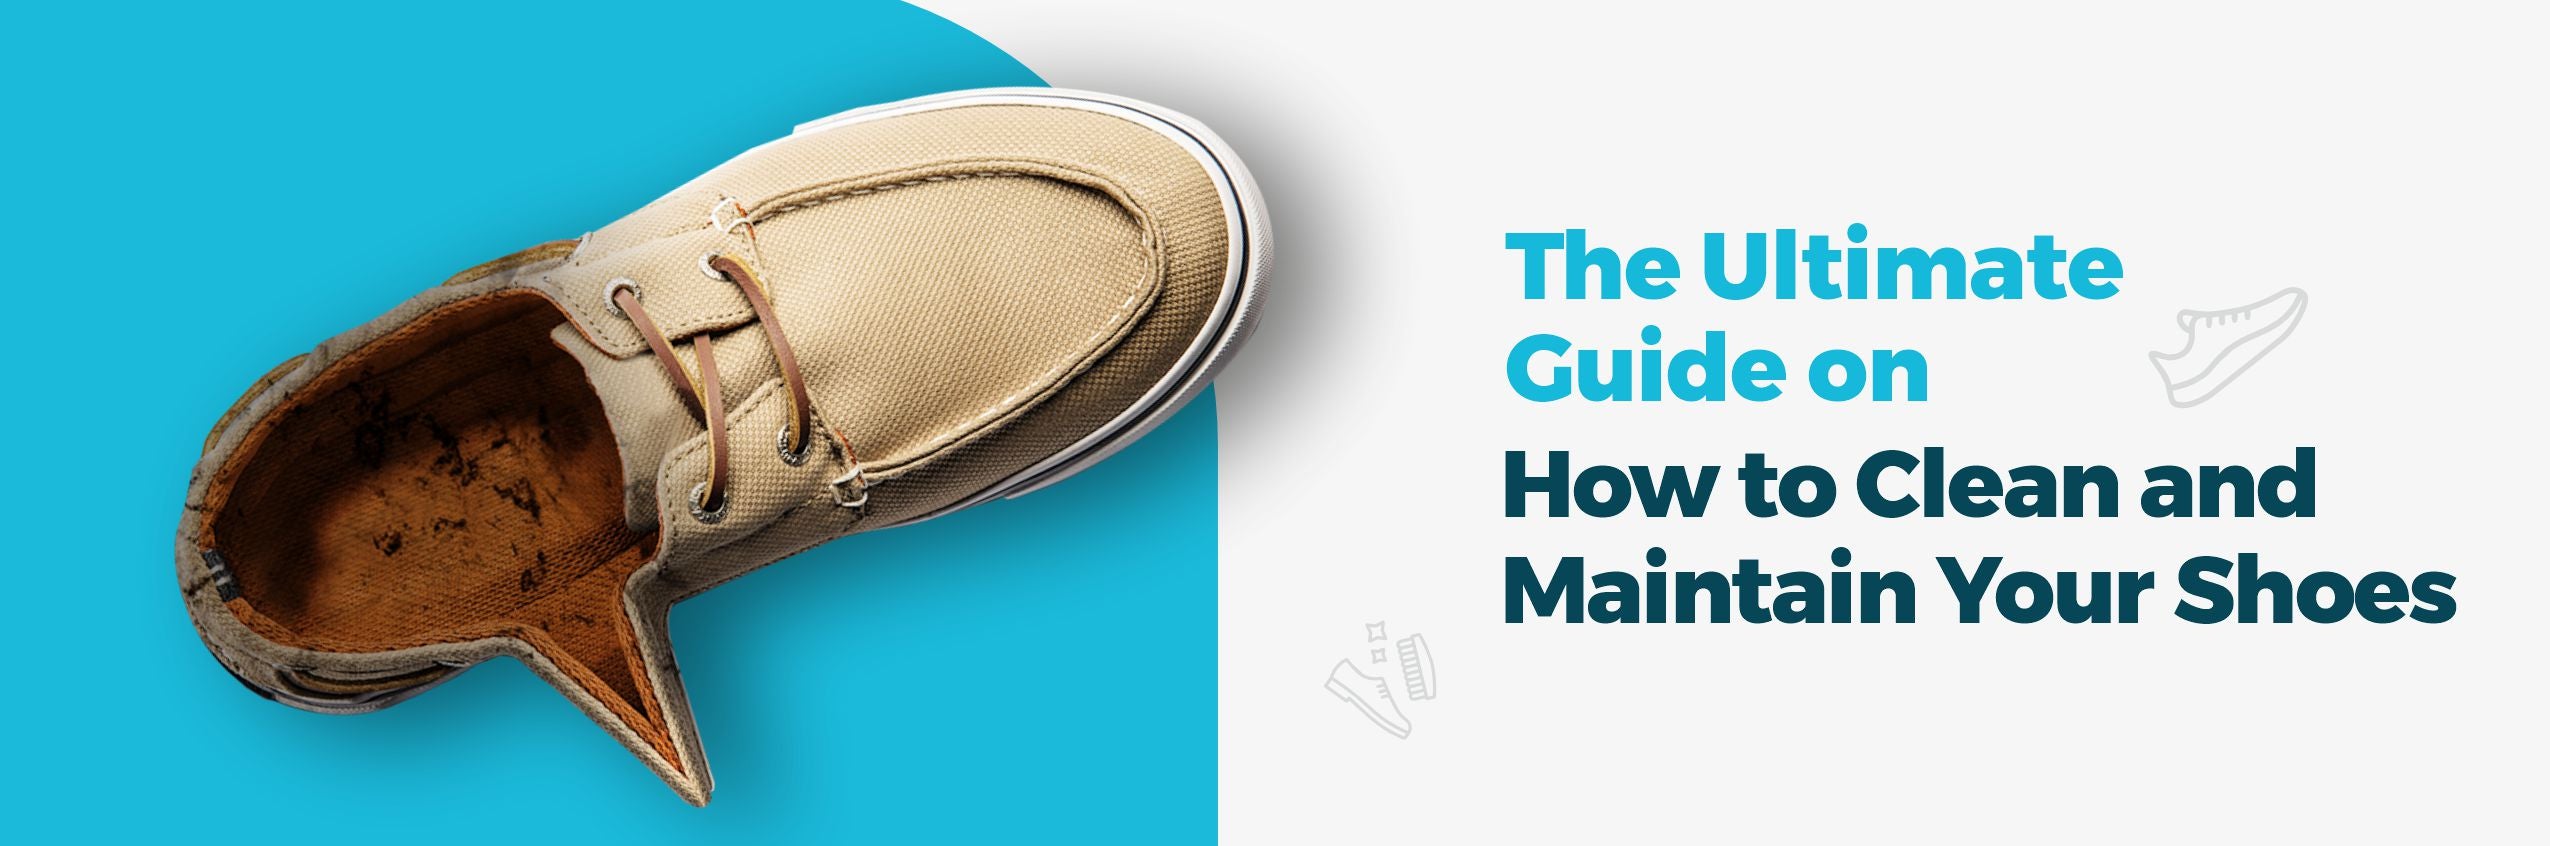 Ultimate Guide on How to Clean and Maintain Your Shoes